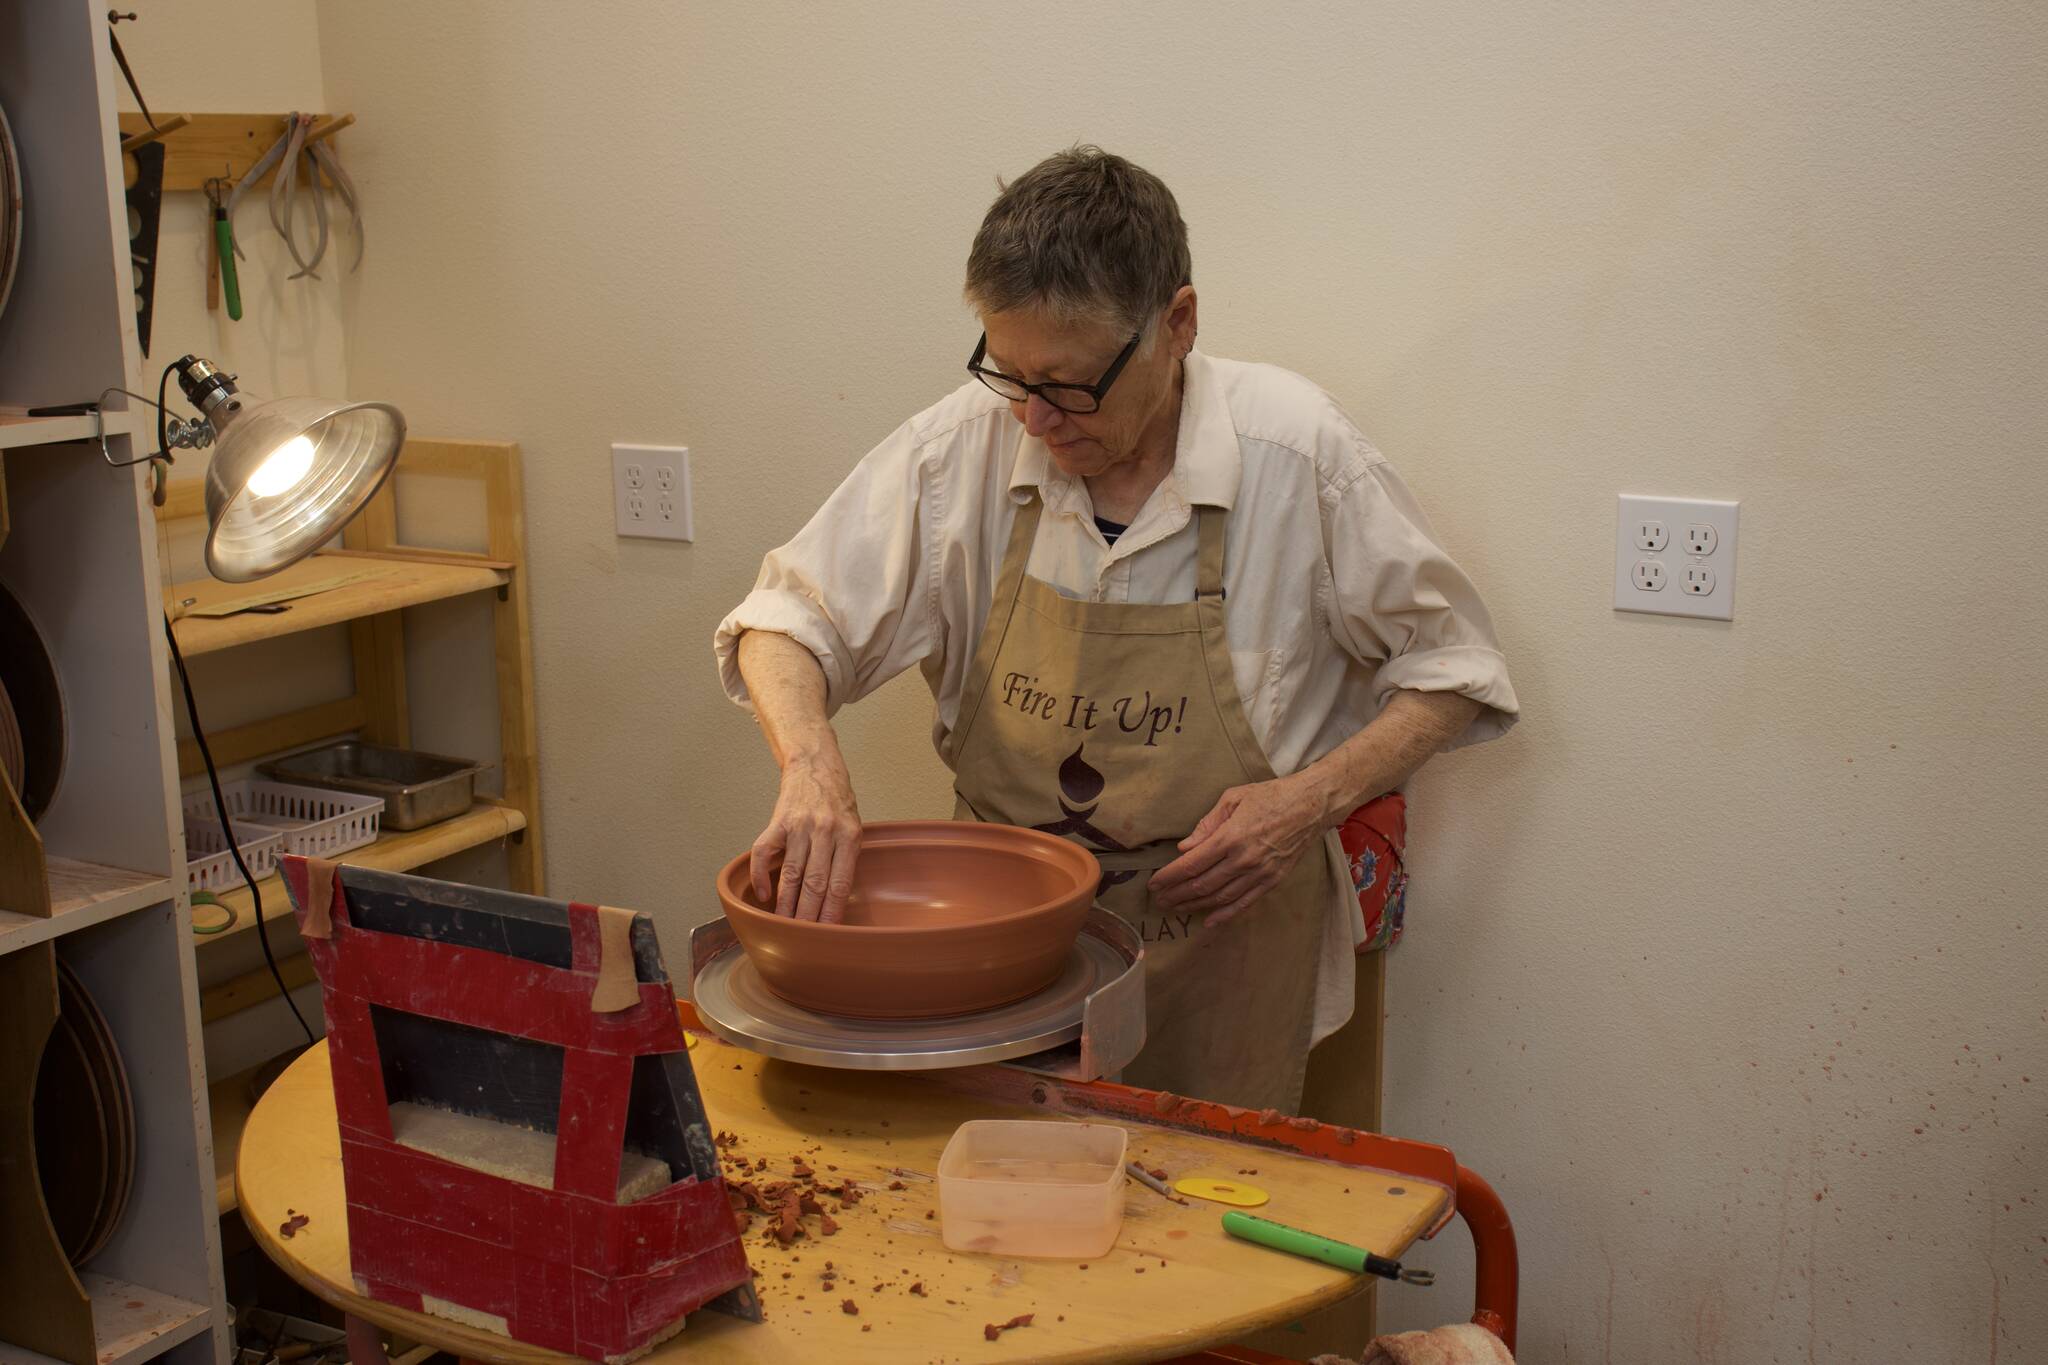 Robbie Lobell makes flameware pots, handmade cooking dishes that are made to cook in the oven or on the stovetop. (Photo by Rachel Rosen/Whidbey News-Times)